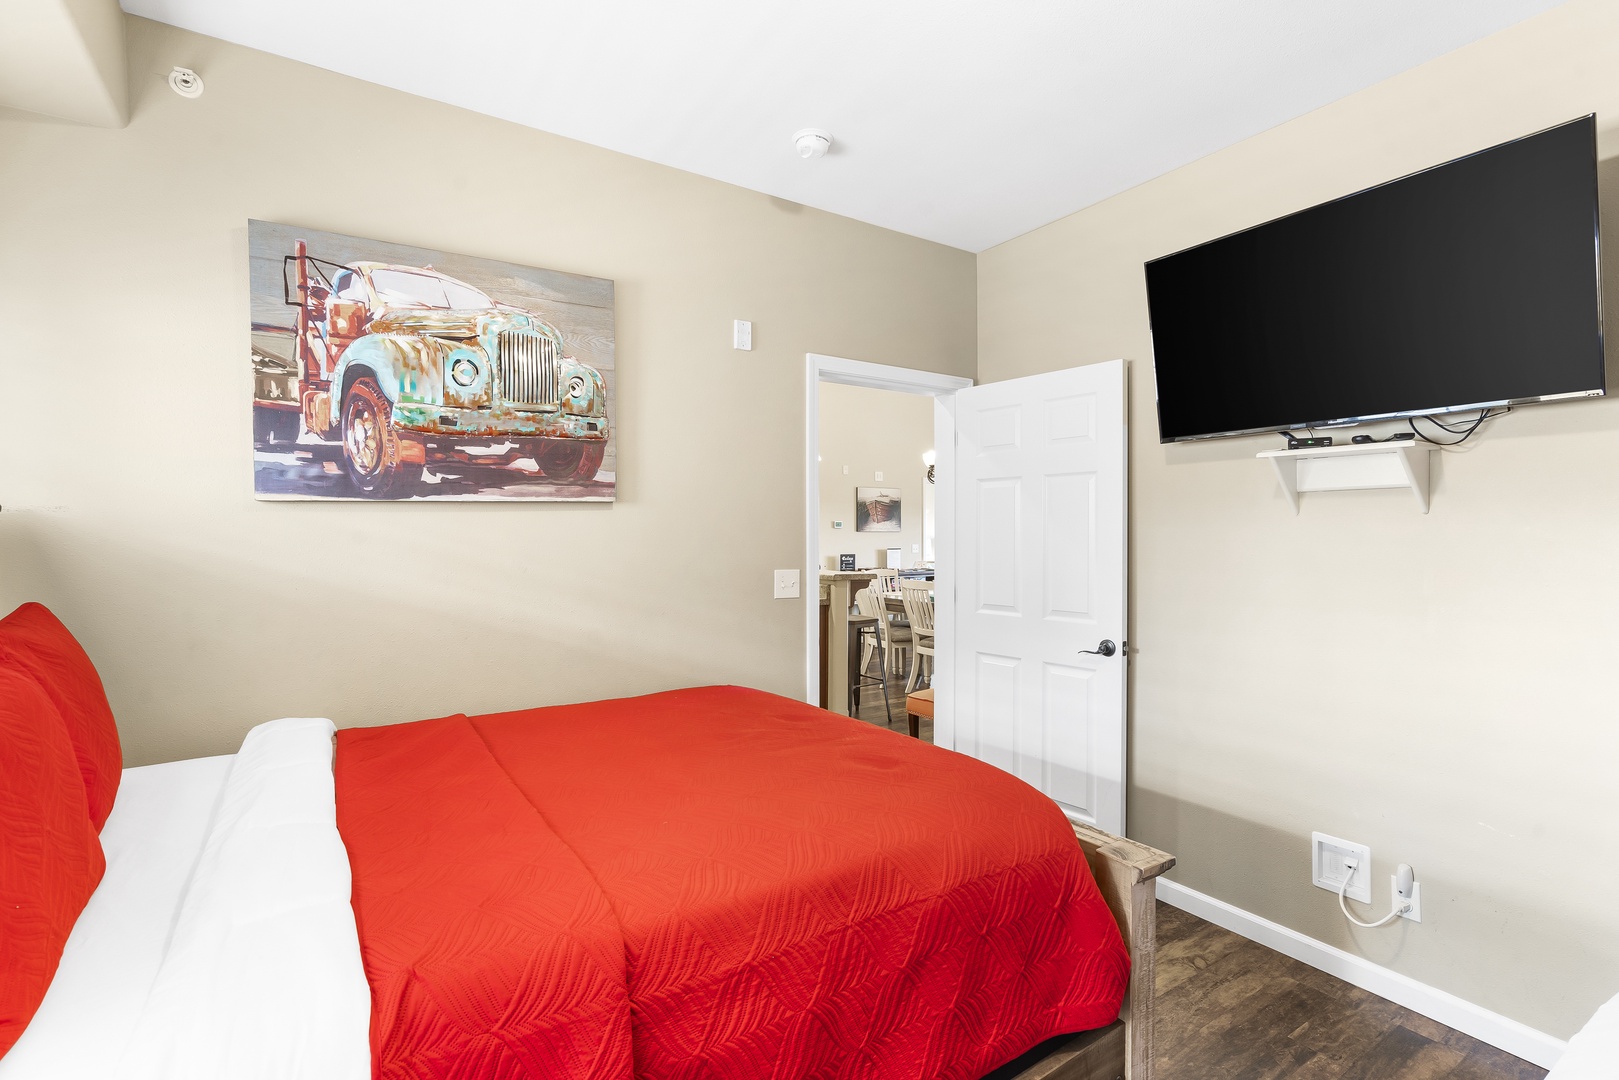 The third bedroom retreat boasts a queen bed, twin-over-full bunks, & a TV